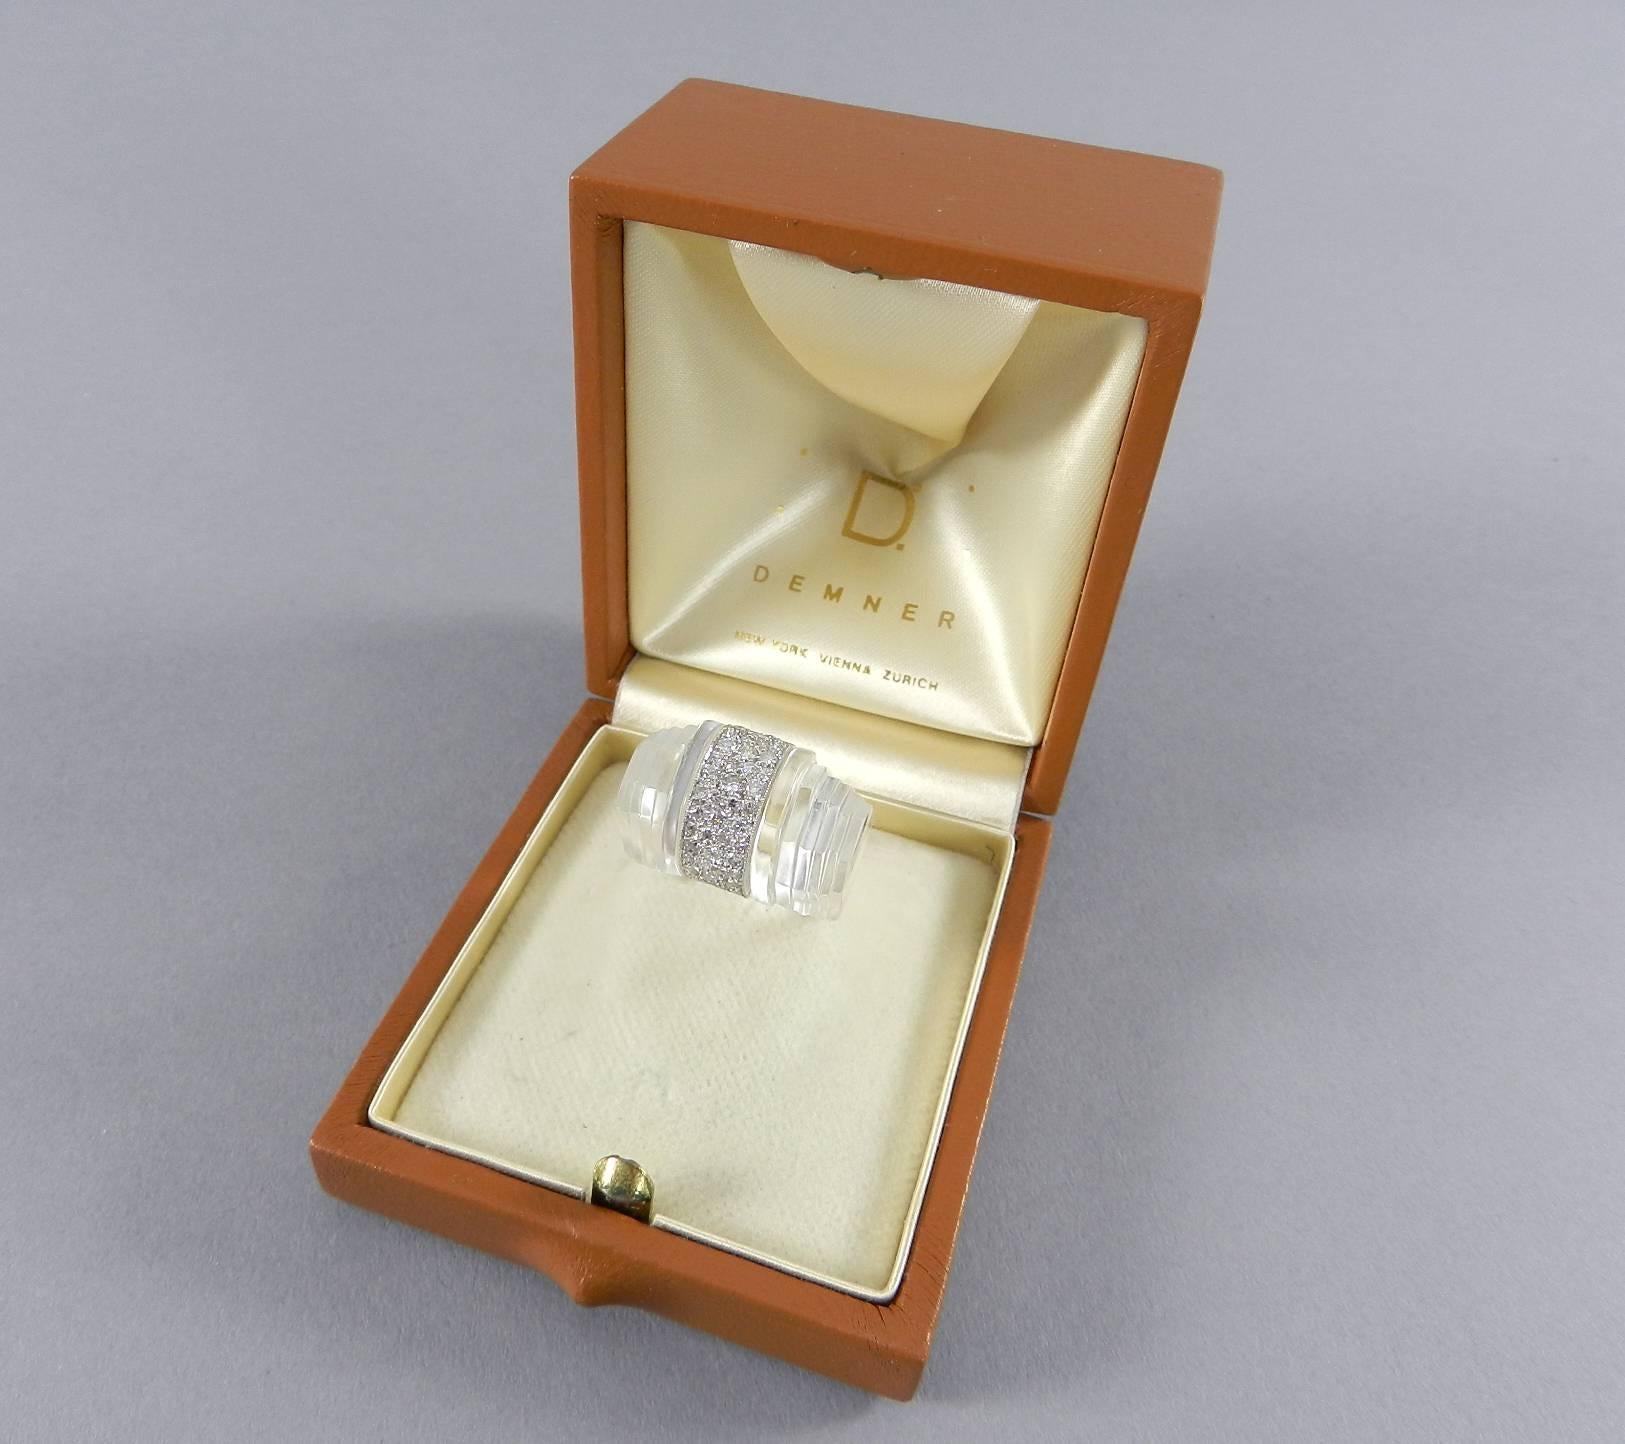 Demner clear rock crystal, diamond, and 18k white gold ring. Stepped Art Deco style design. With original box. Ring size 6.5. Approximately 1 carat total weight diamonds, VS clarity, G color.  Front face measures approximately 23 x 14 mm. 

We